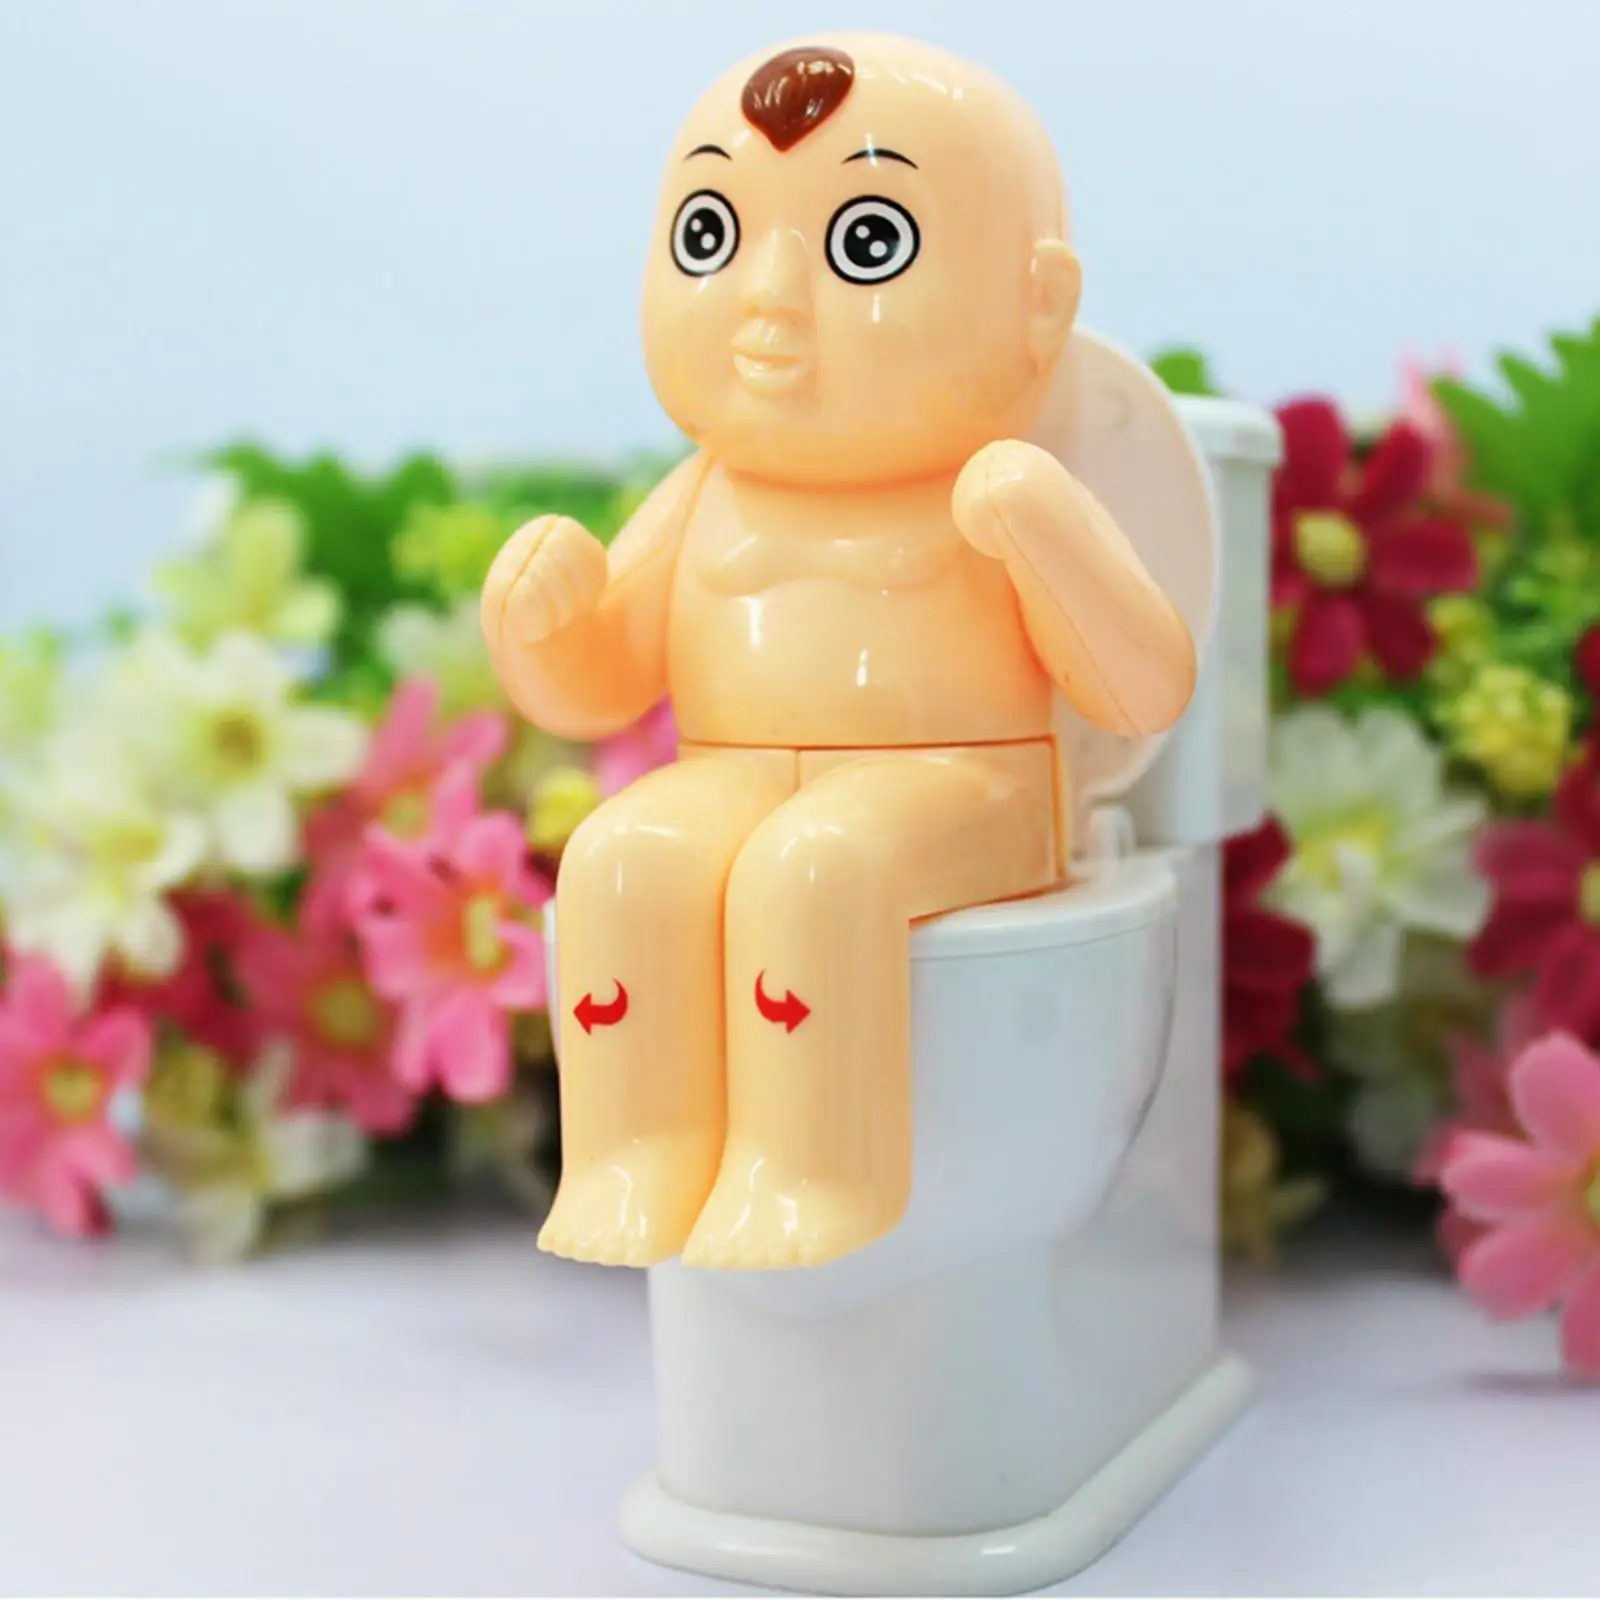 Novelty Peeing Boy Squirter Toys Gag Gift Squirt Wee Pee Boy Toy Boy Men